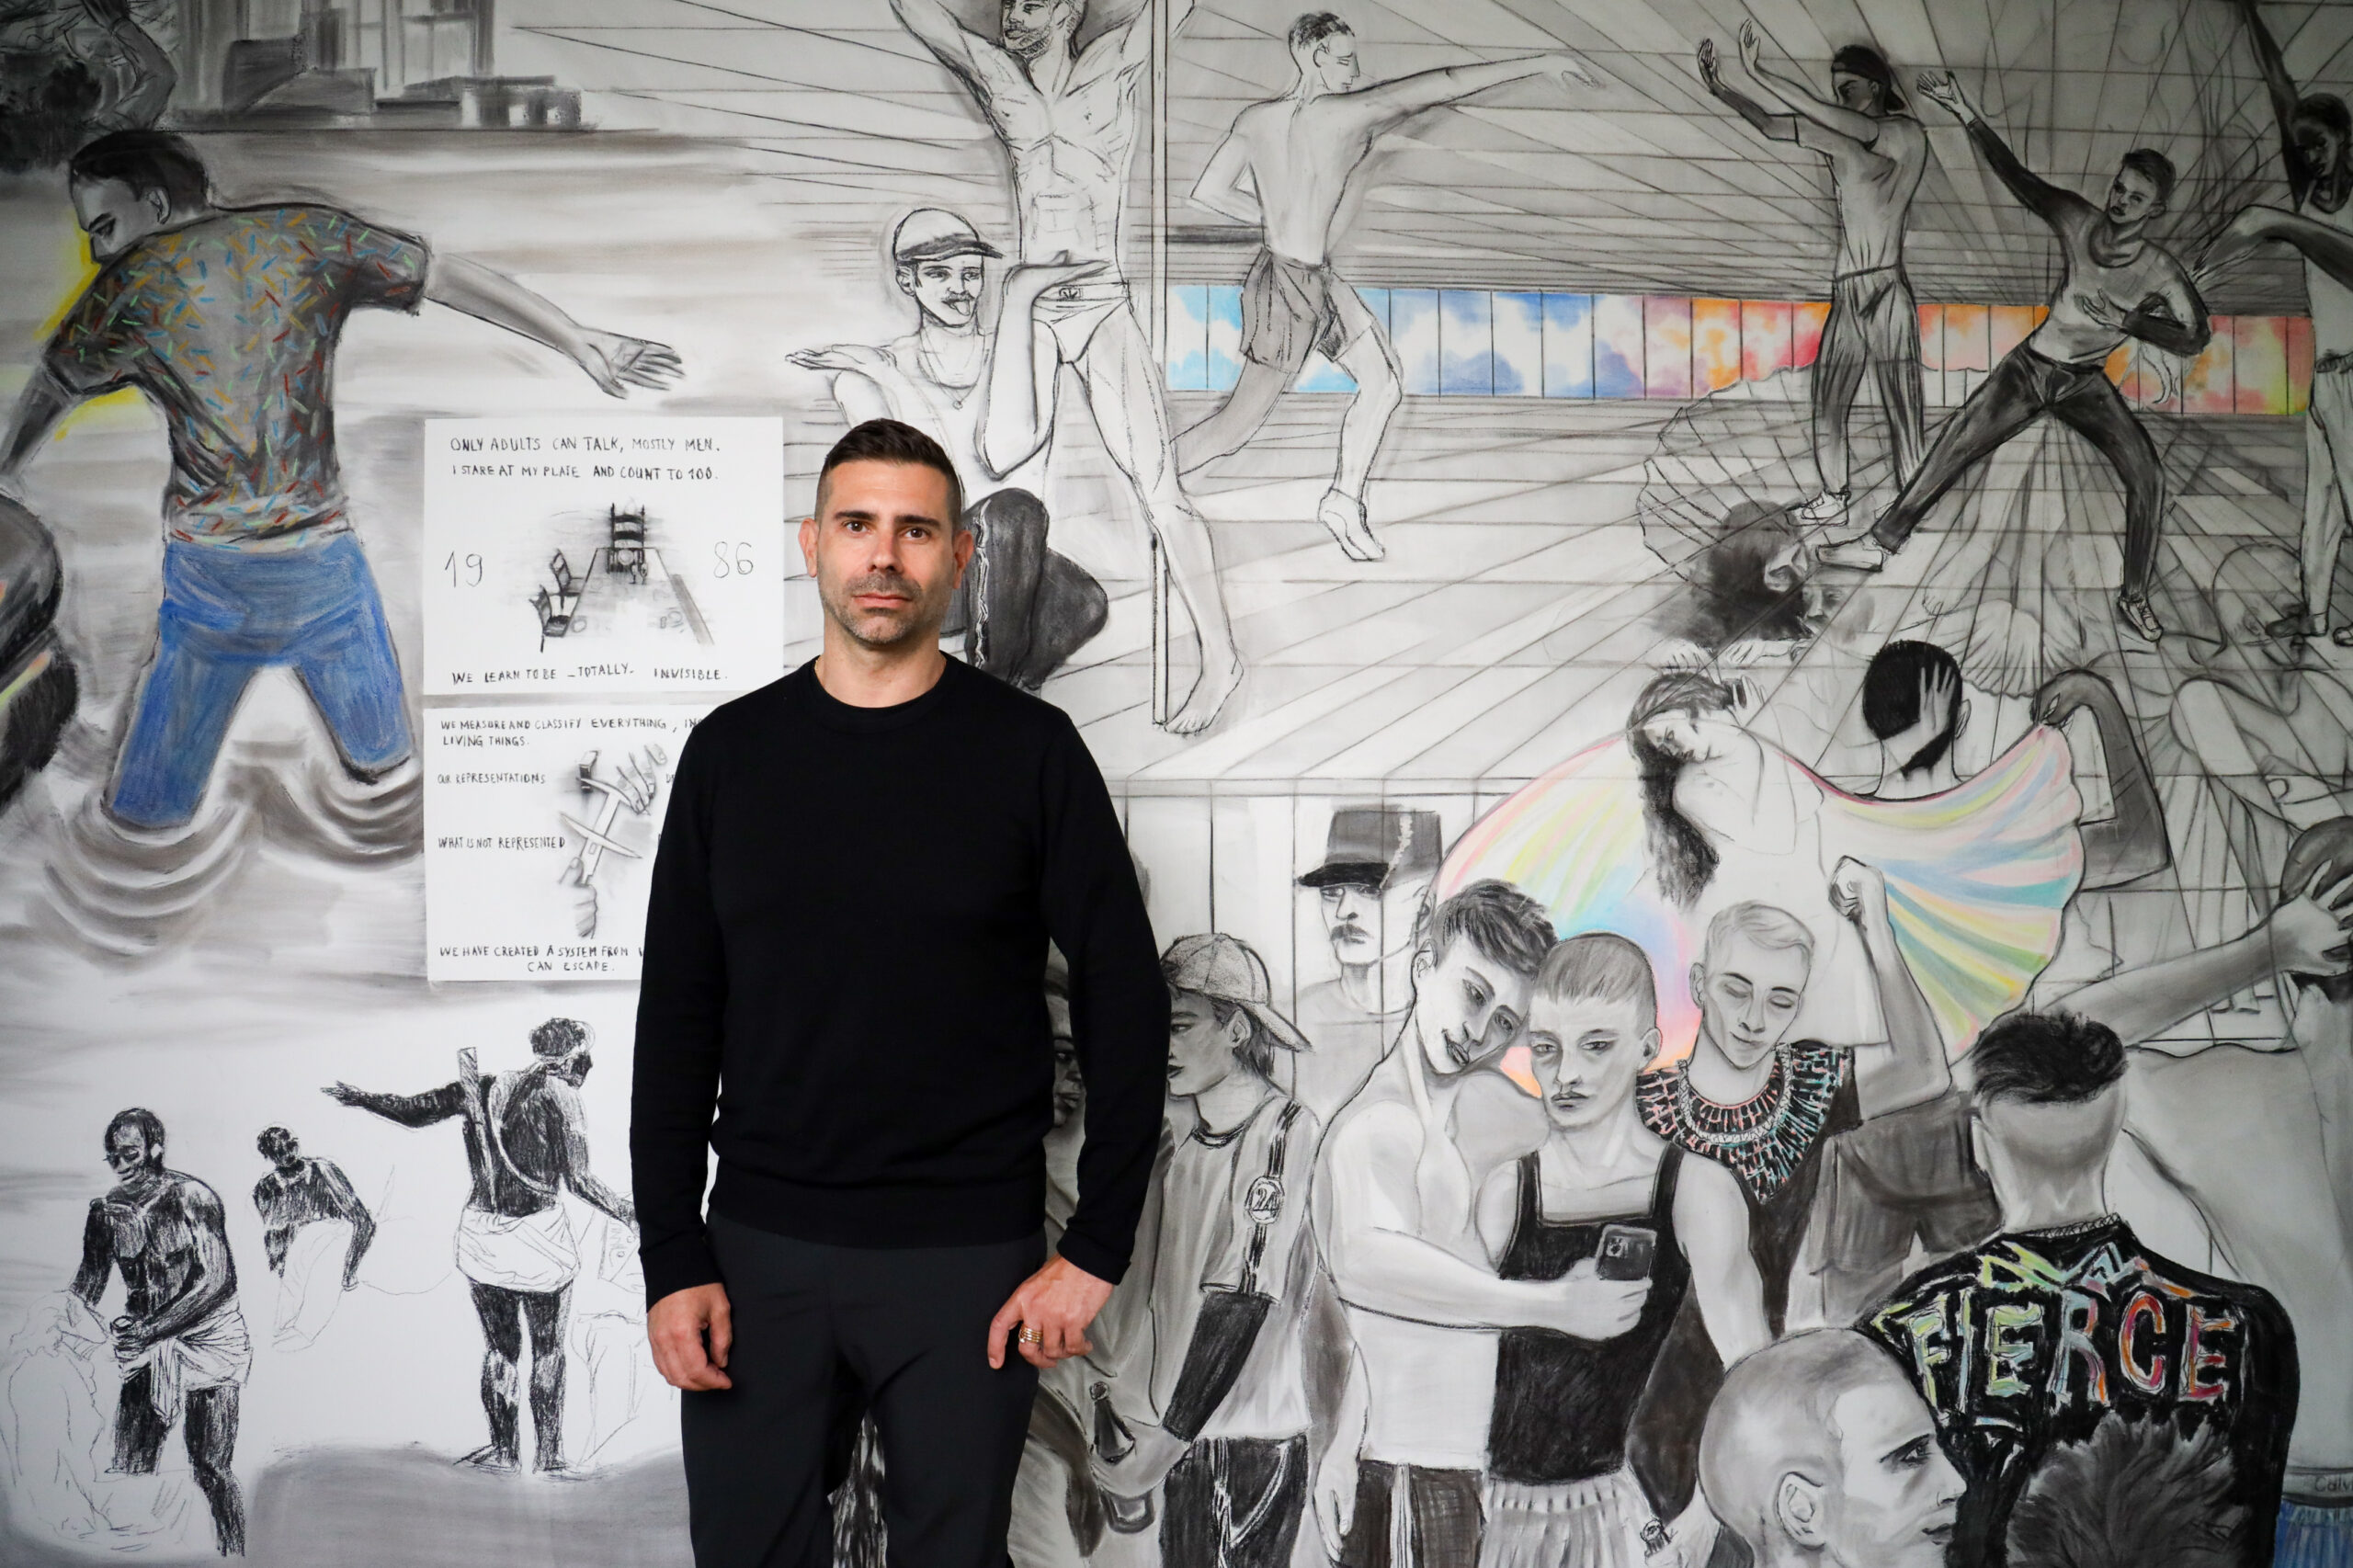 Marc Bauer stands in front of a detailed mural, dressed in a black long-sleeve shirt and black pants, offering a stark contrast to the lively and intricate grayscale artwork behind him that depicts a variety of human figures and text elements in a dynamic composition.